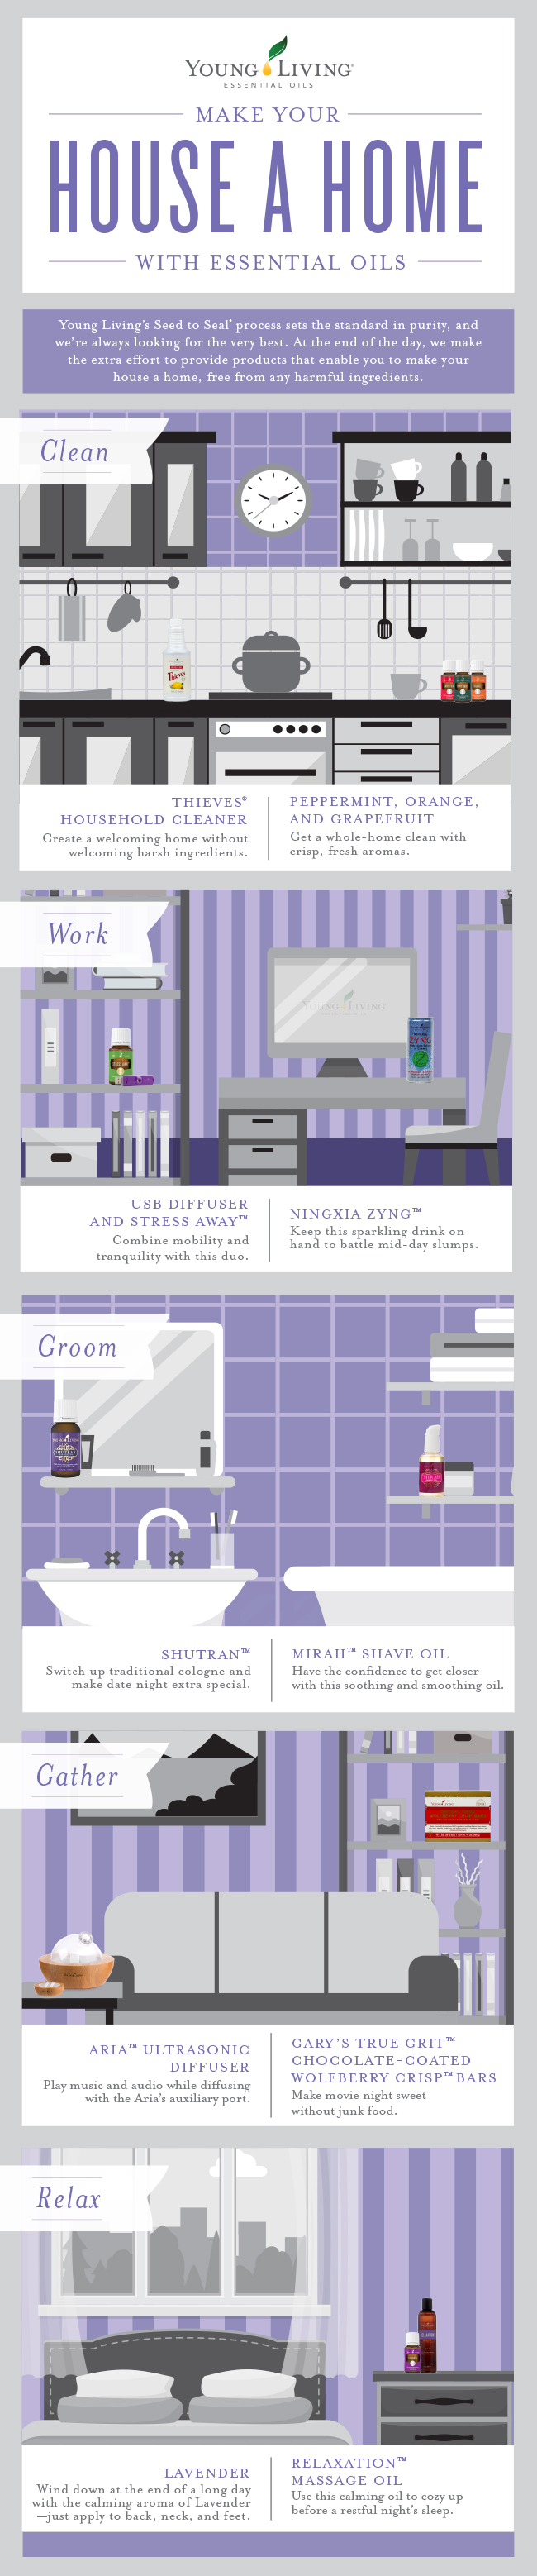 Make your house a home infographic